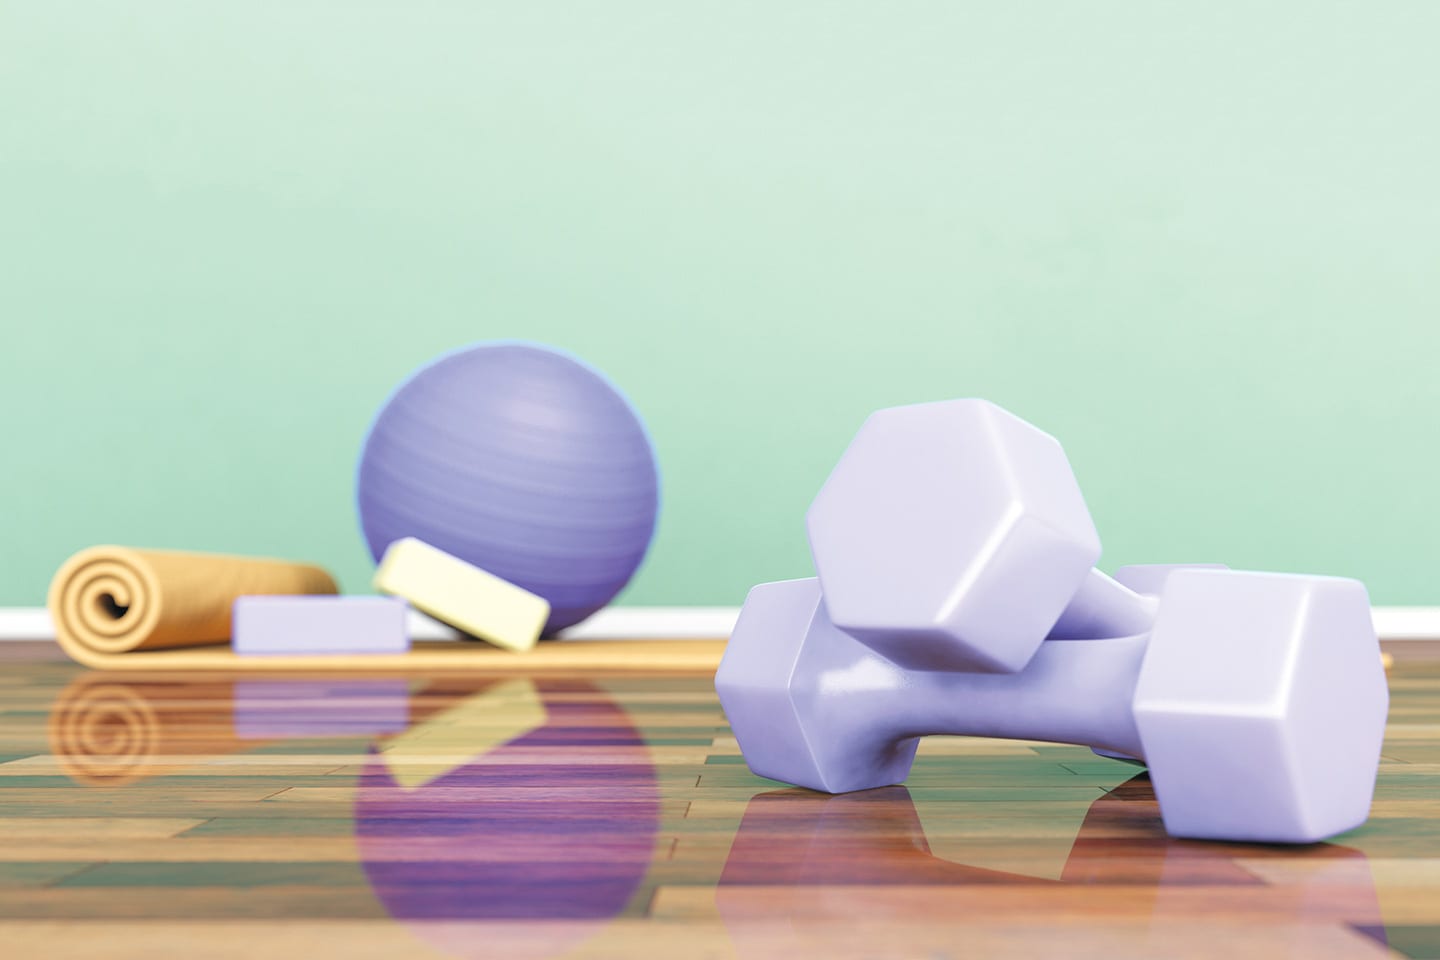 purple yoga mat, exercise ball, and hand weights on wood floor with green wall